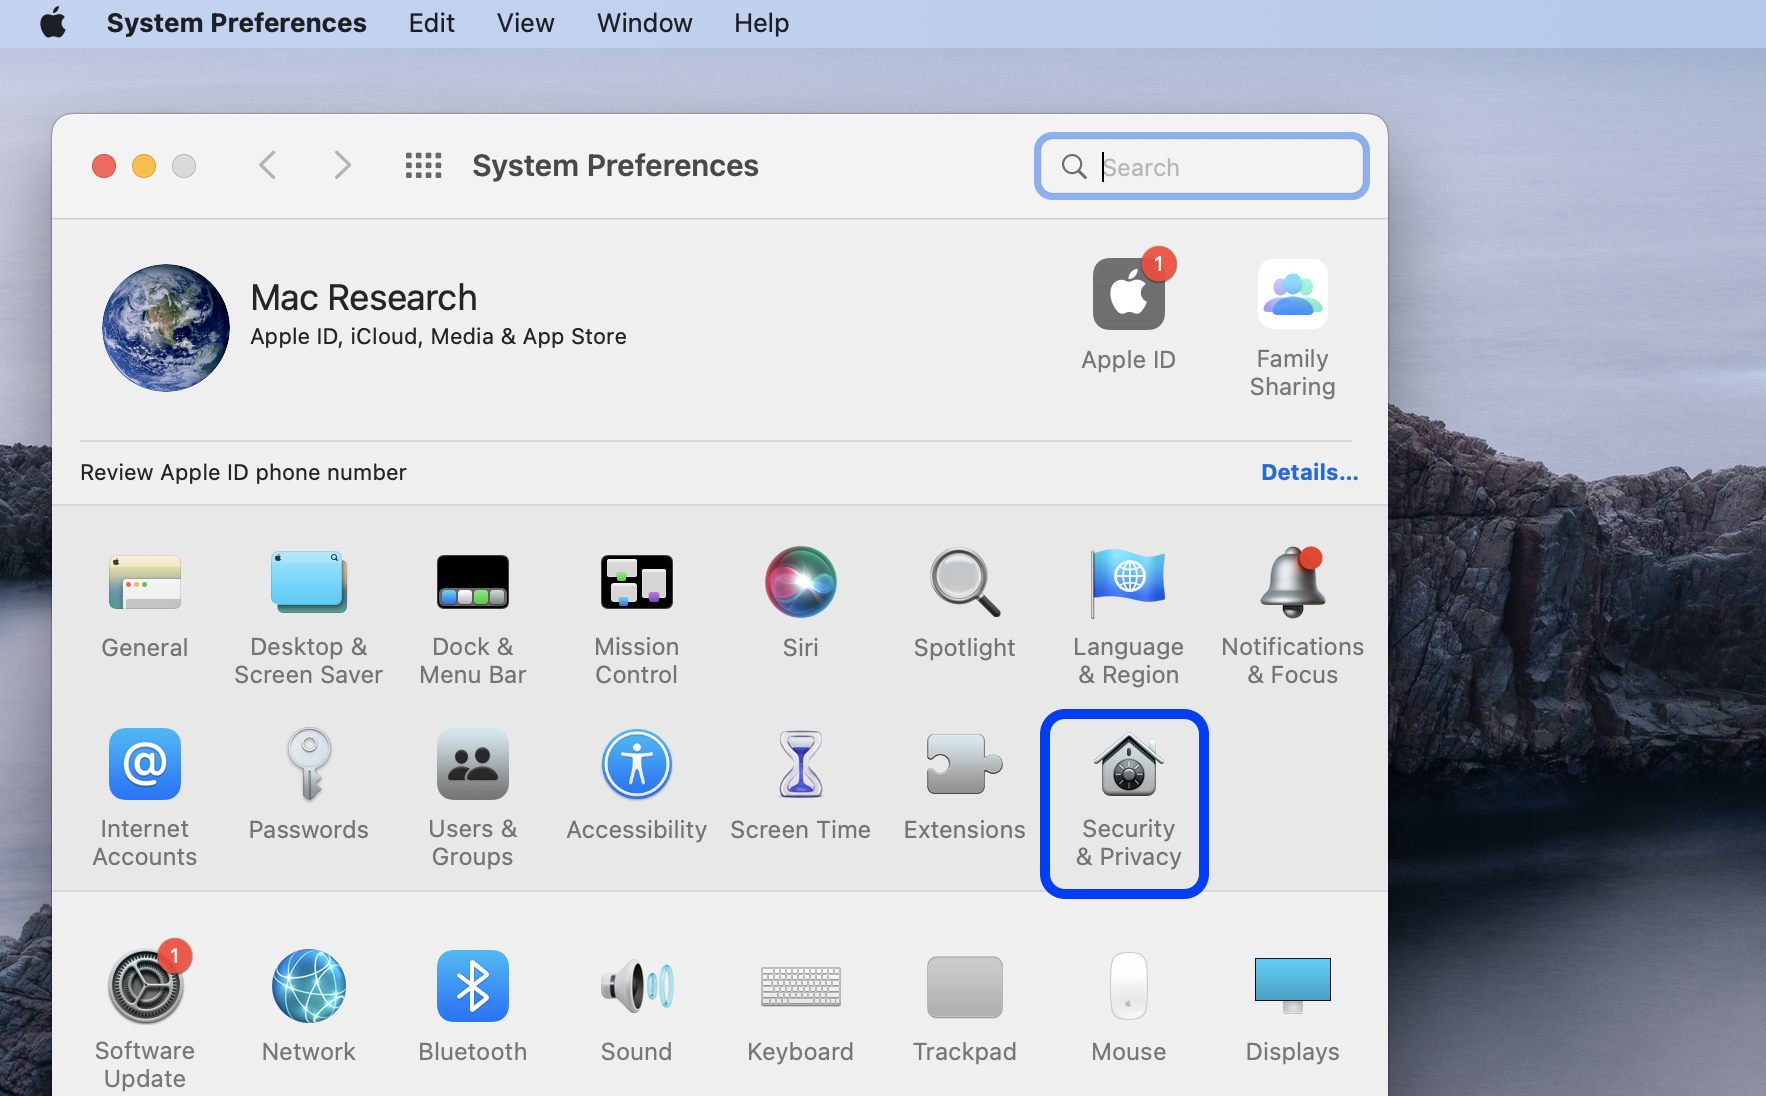 System Preferences Security & Privacy